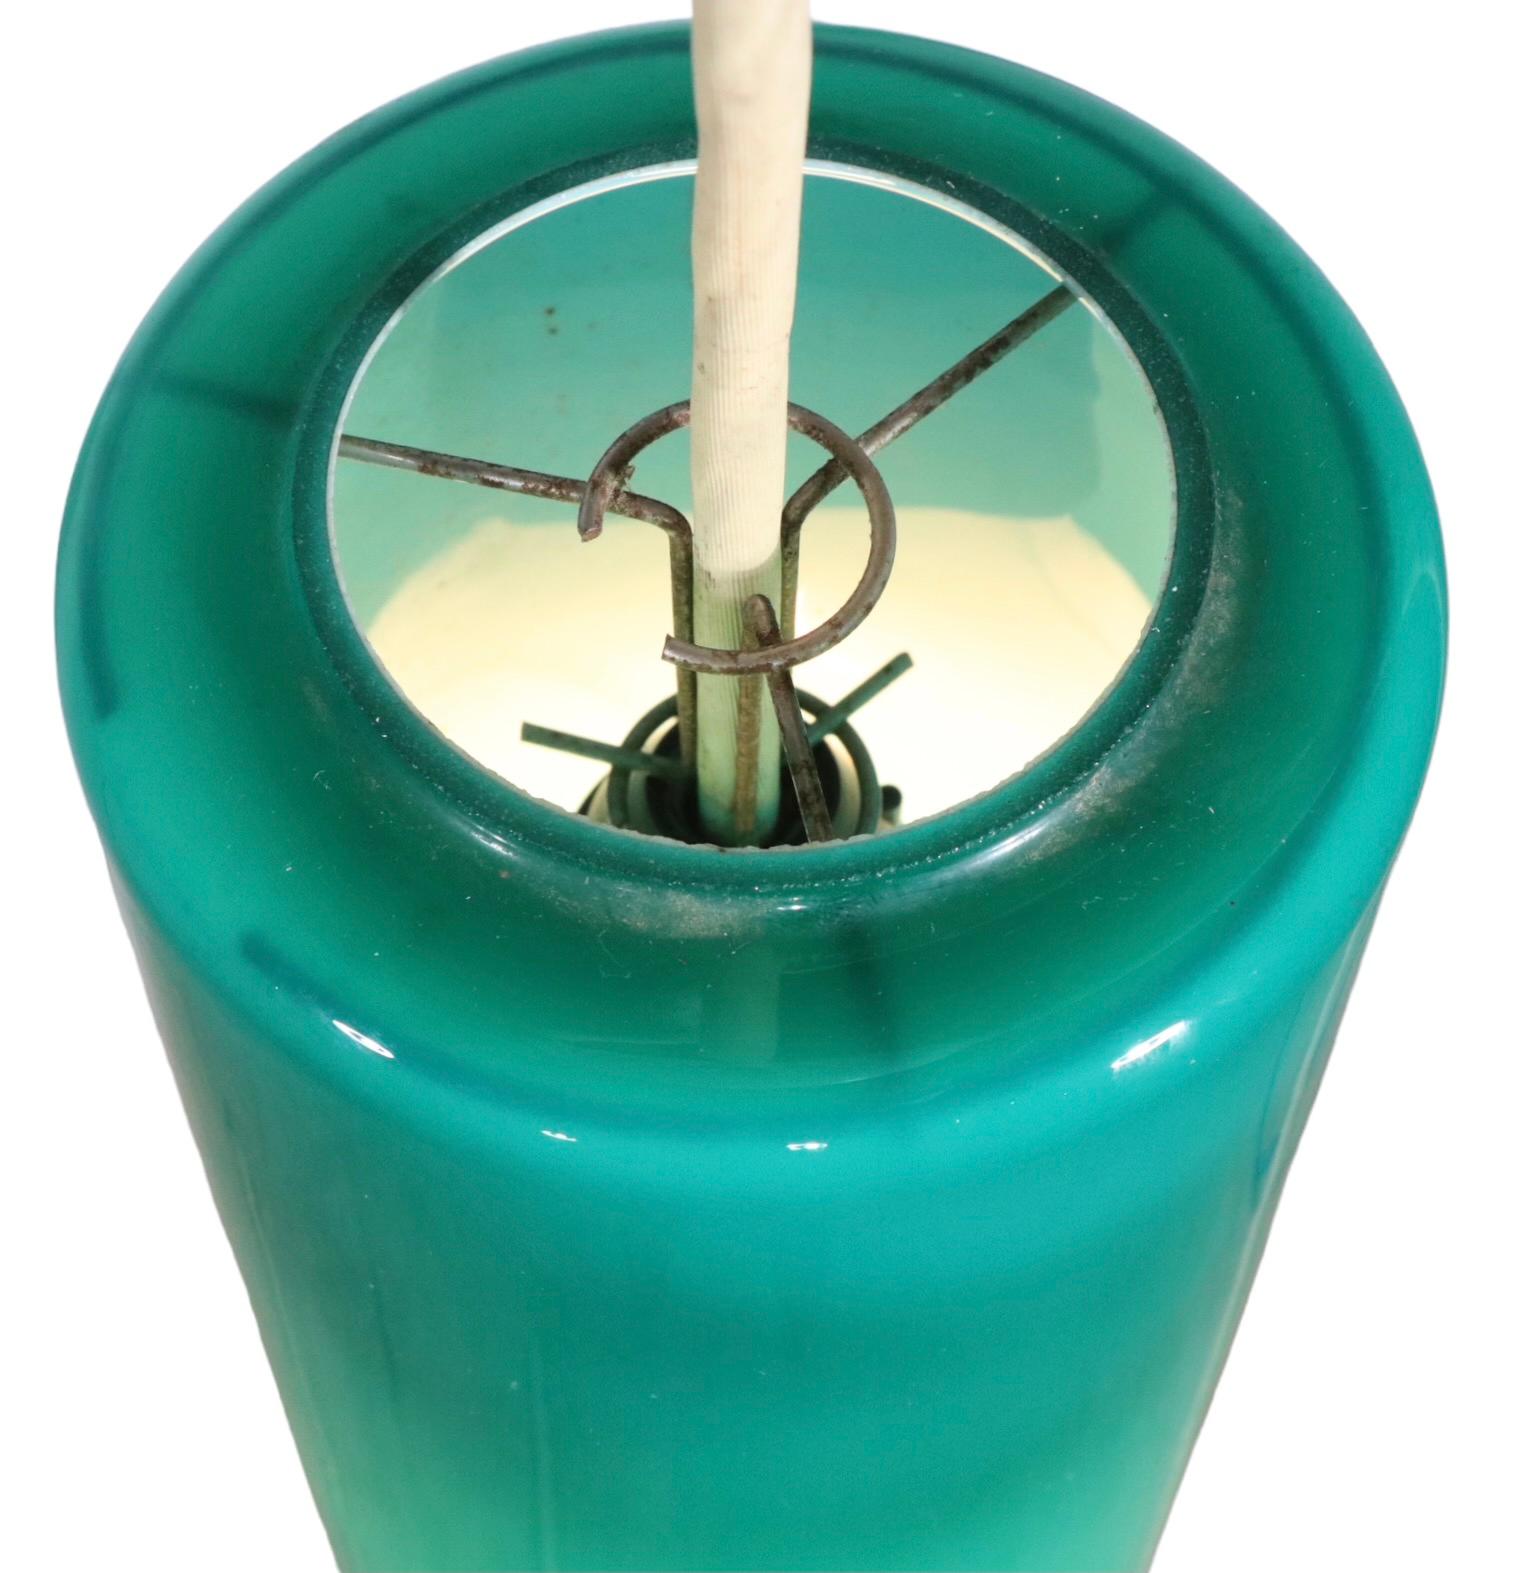 Prescolite Cylinder Pendant Chandelier in Green Glass, C 1950 - 1970's For Sale 3